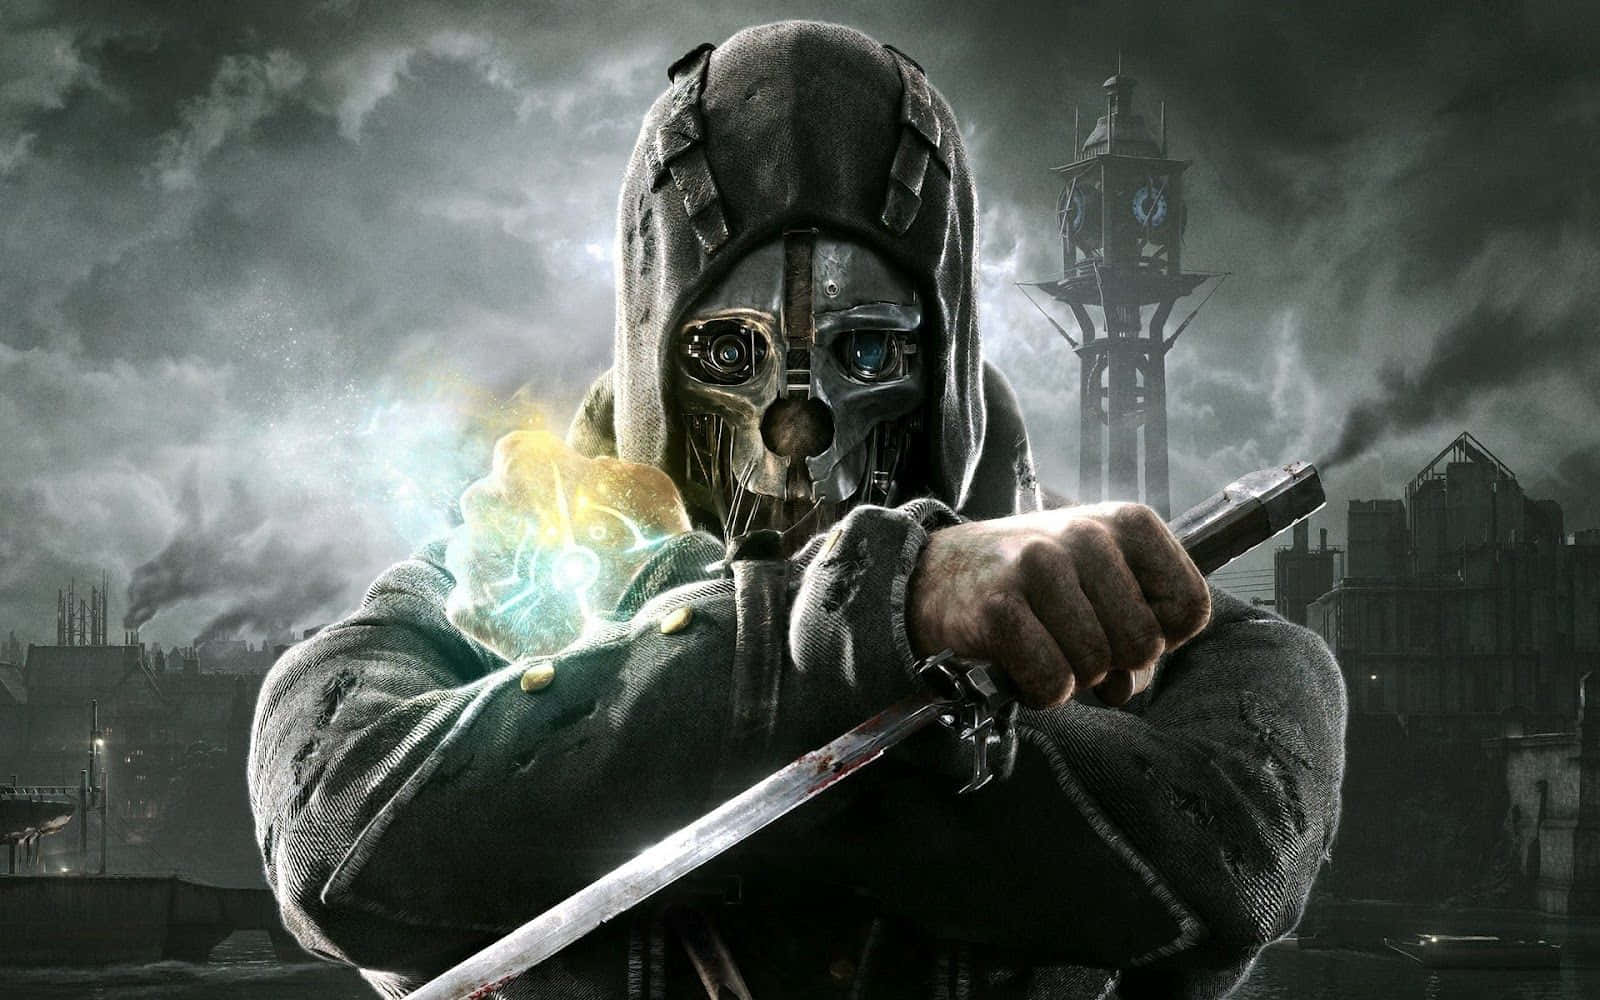 Hd Video Game Dishonored